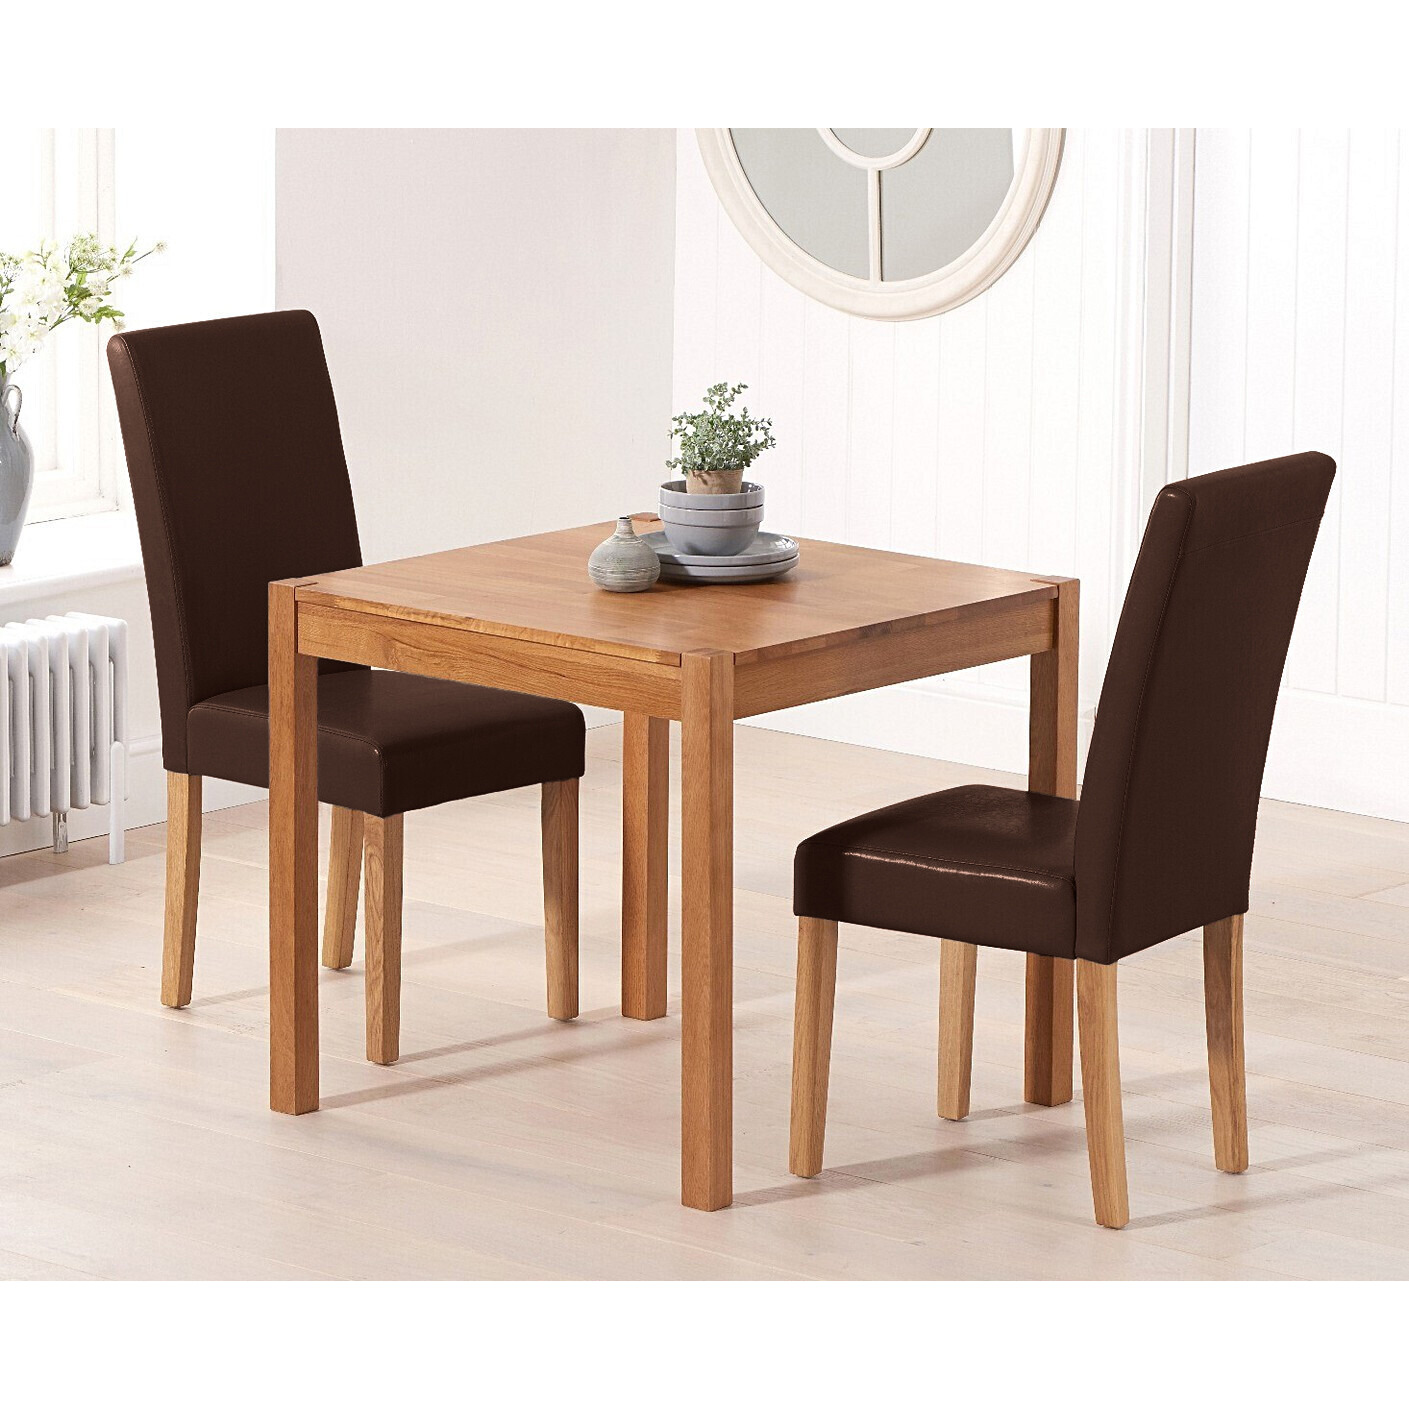 York 80cm Solid Oak Dining Table With 2 Brown Olivia Chairs